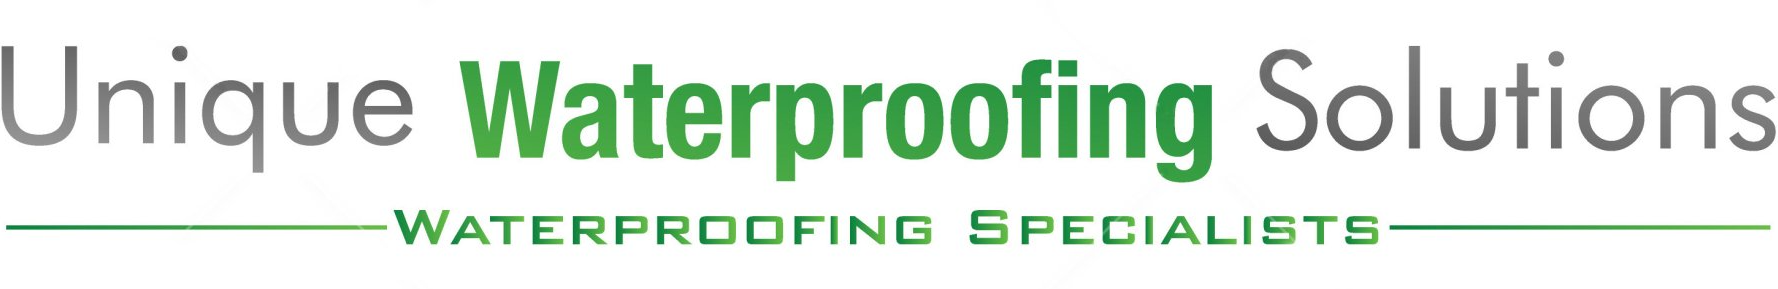 Unique Waterproofing Solutions are Professional Waterproofers in Castle Hill